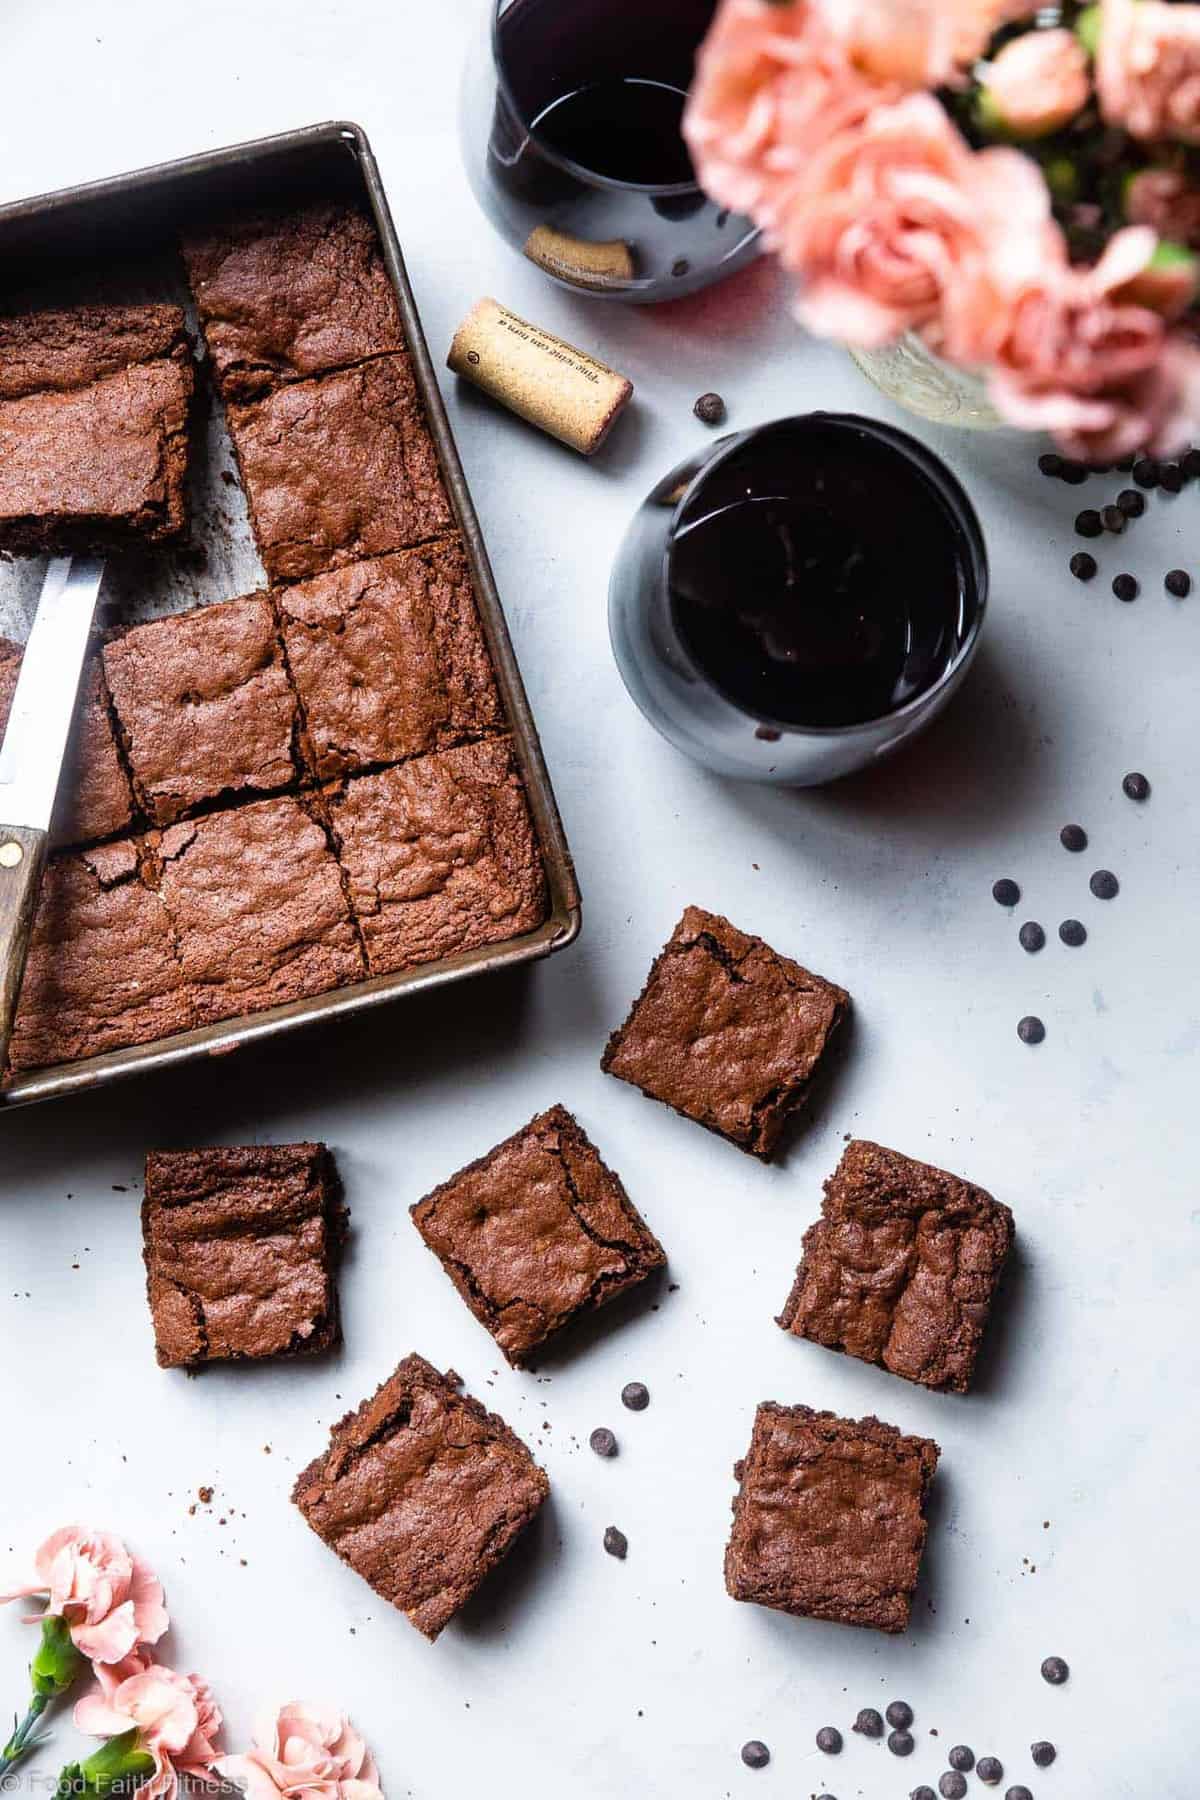 Easy Gluten Free Dairy Free Brownie Recipe - These grain free, healthy brownies come together in less than an hour and are SO dense, chewy and FUDGY! Paleo friendly, gluten and dairy free and SO delicious! | #Foodfaithfitness | 